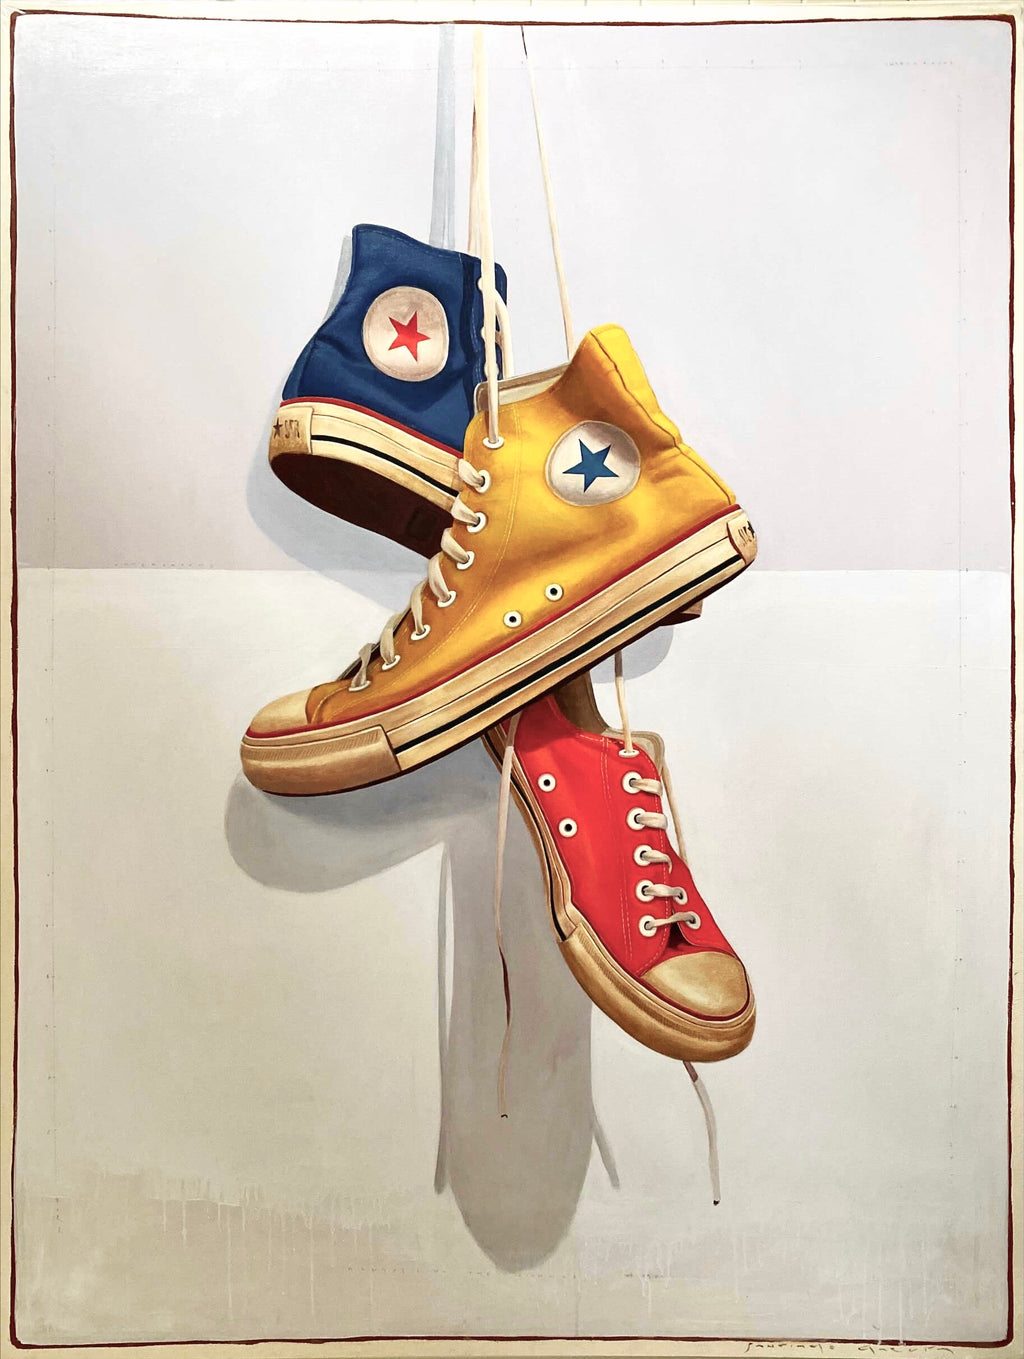 oil painting of vintage blue, yellow, and red converse sneakers hanging by laces on two toned blackground